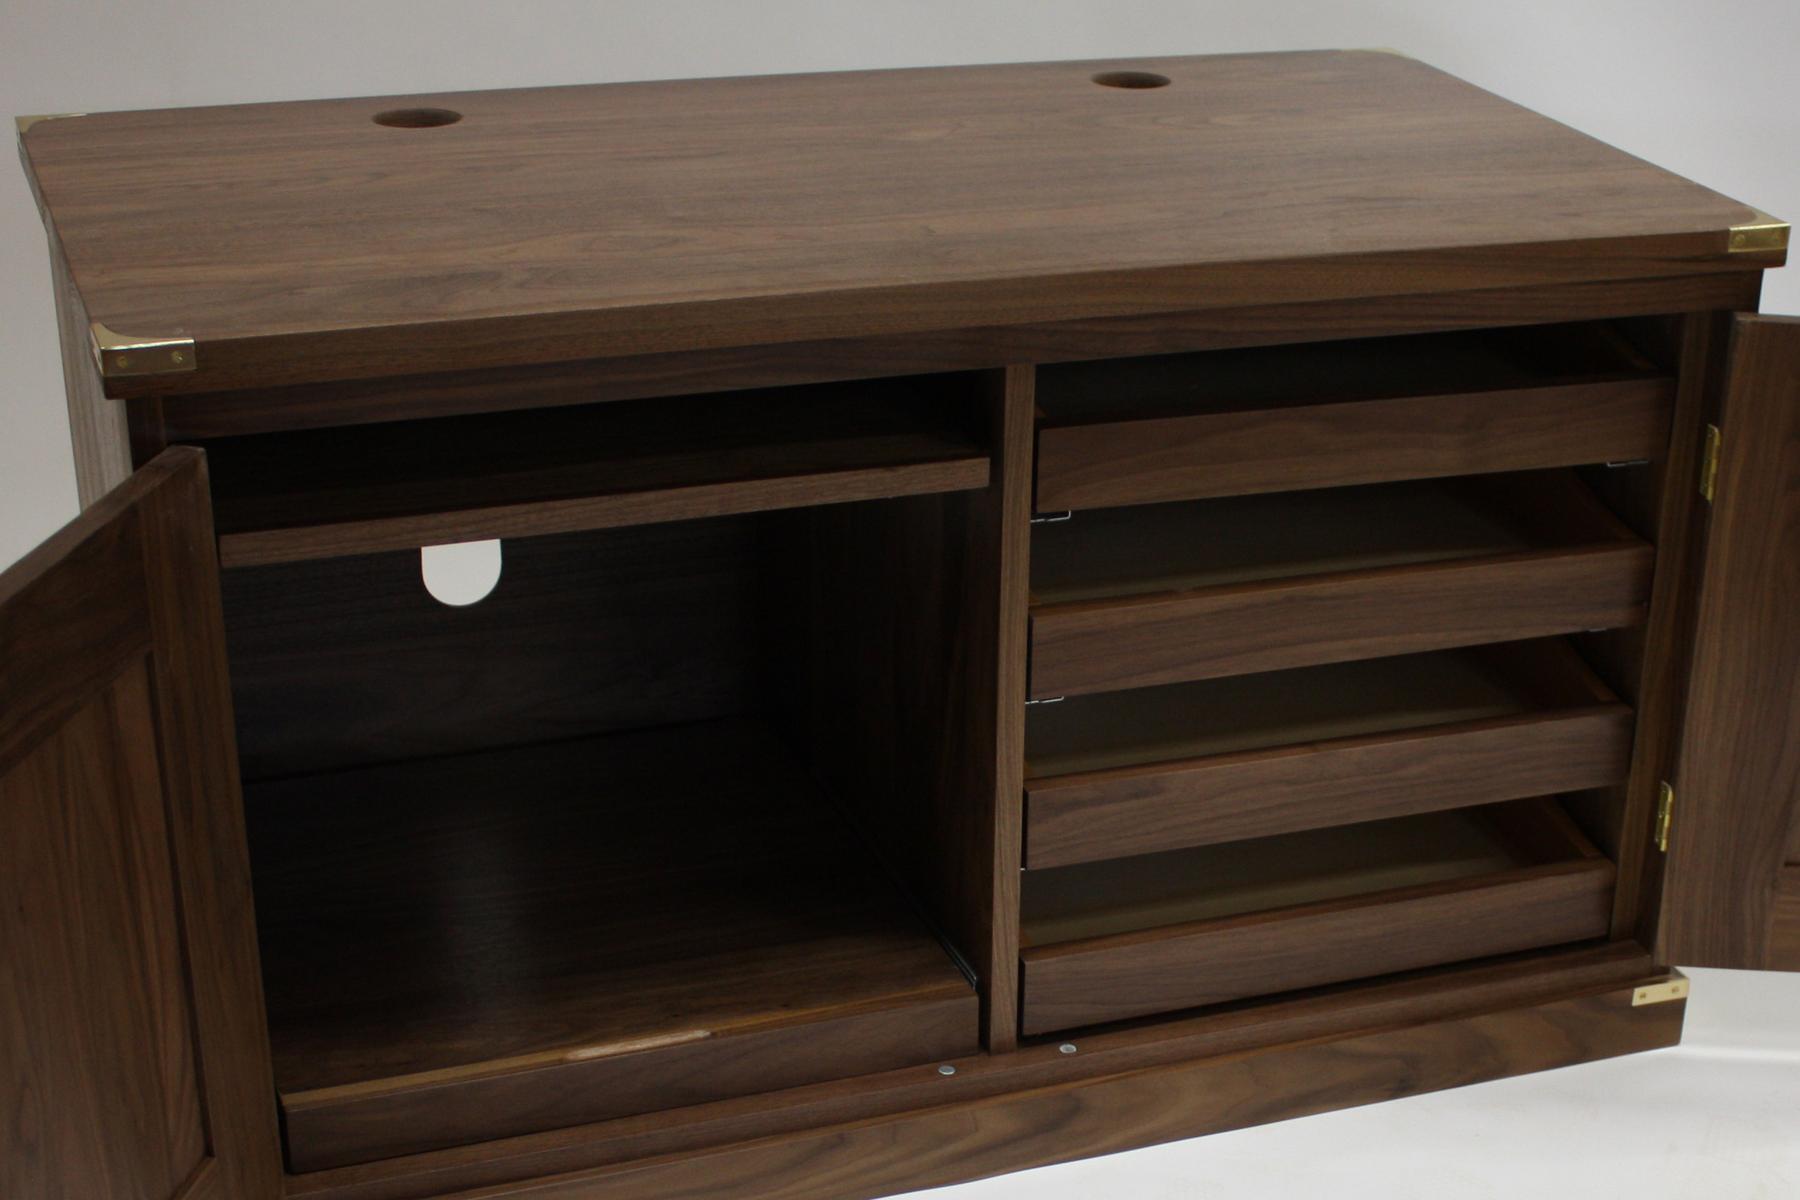 Walnut campaign style office furniture